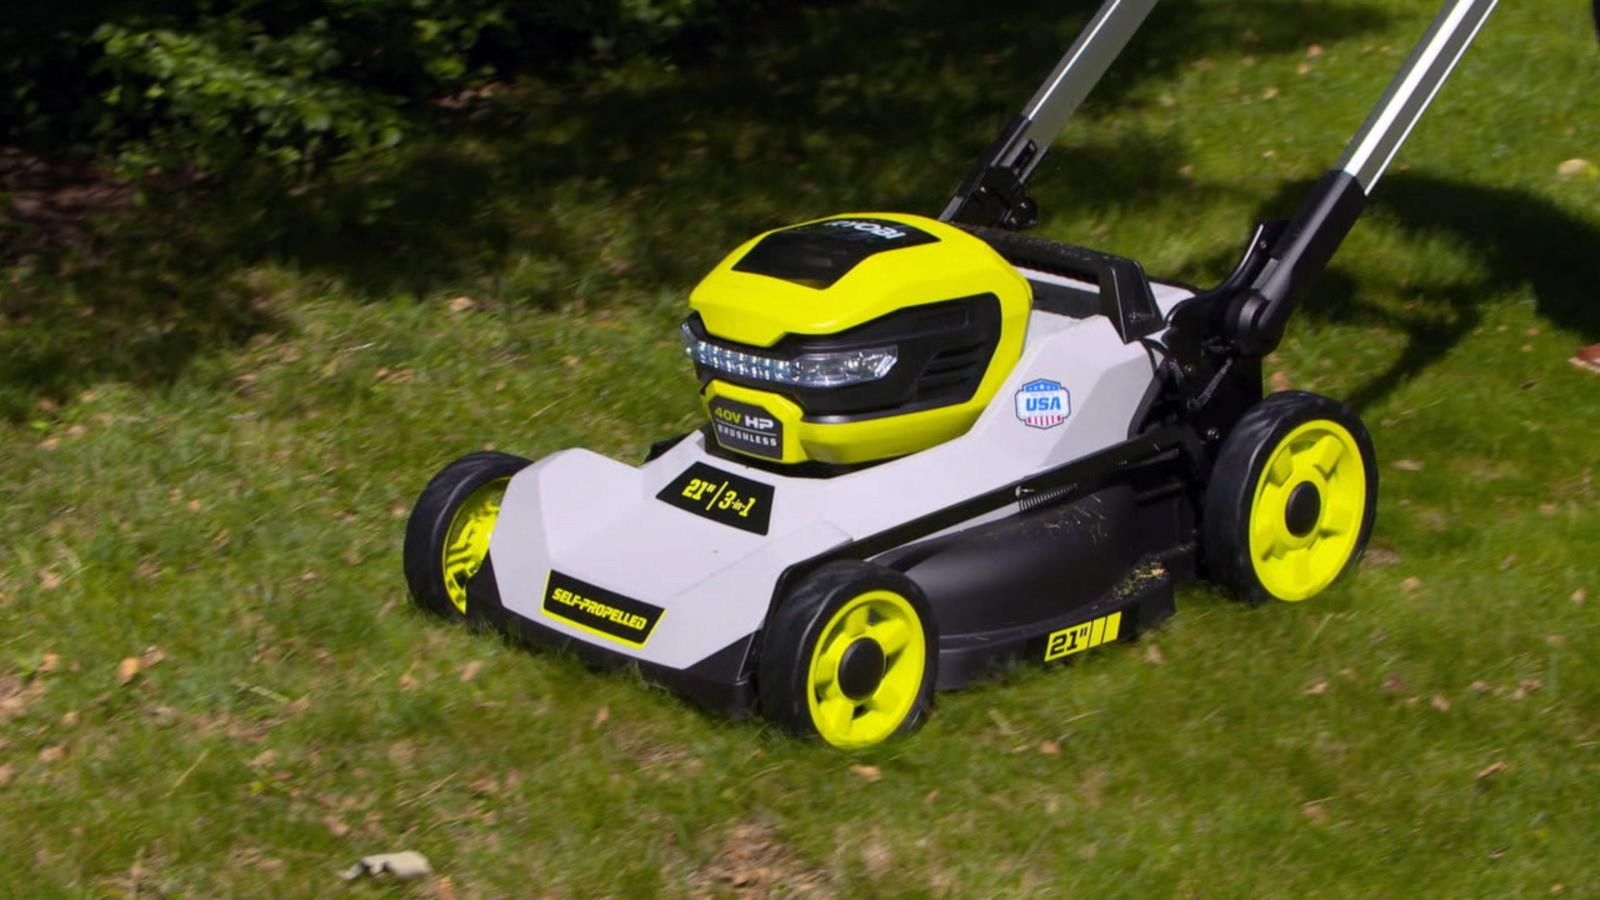 Kick off July 4 weekend with a new battery-powered mower - Good